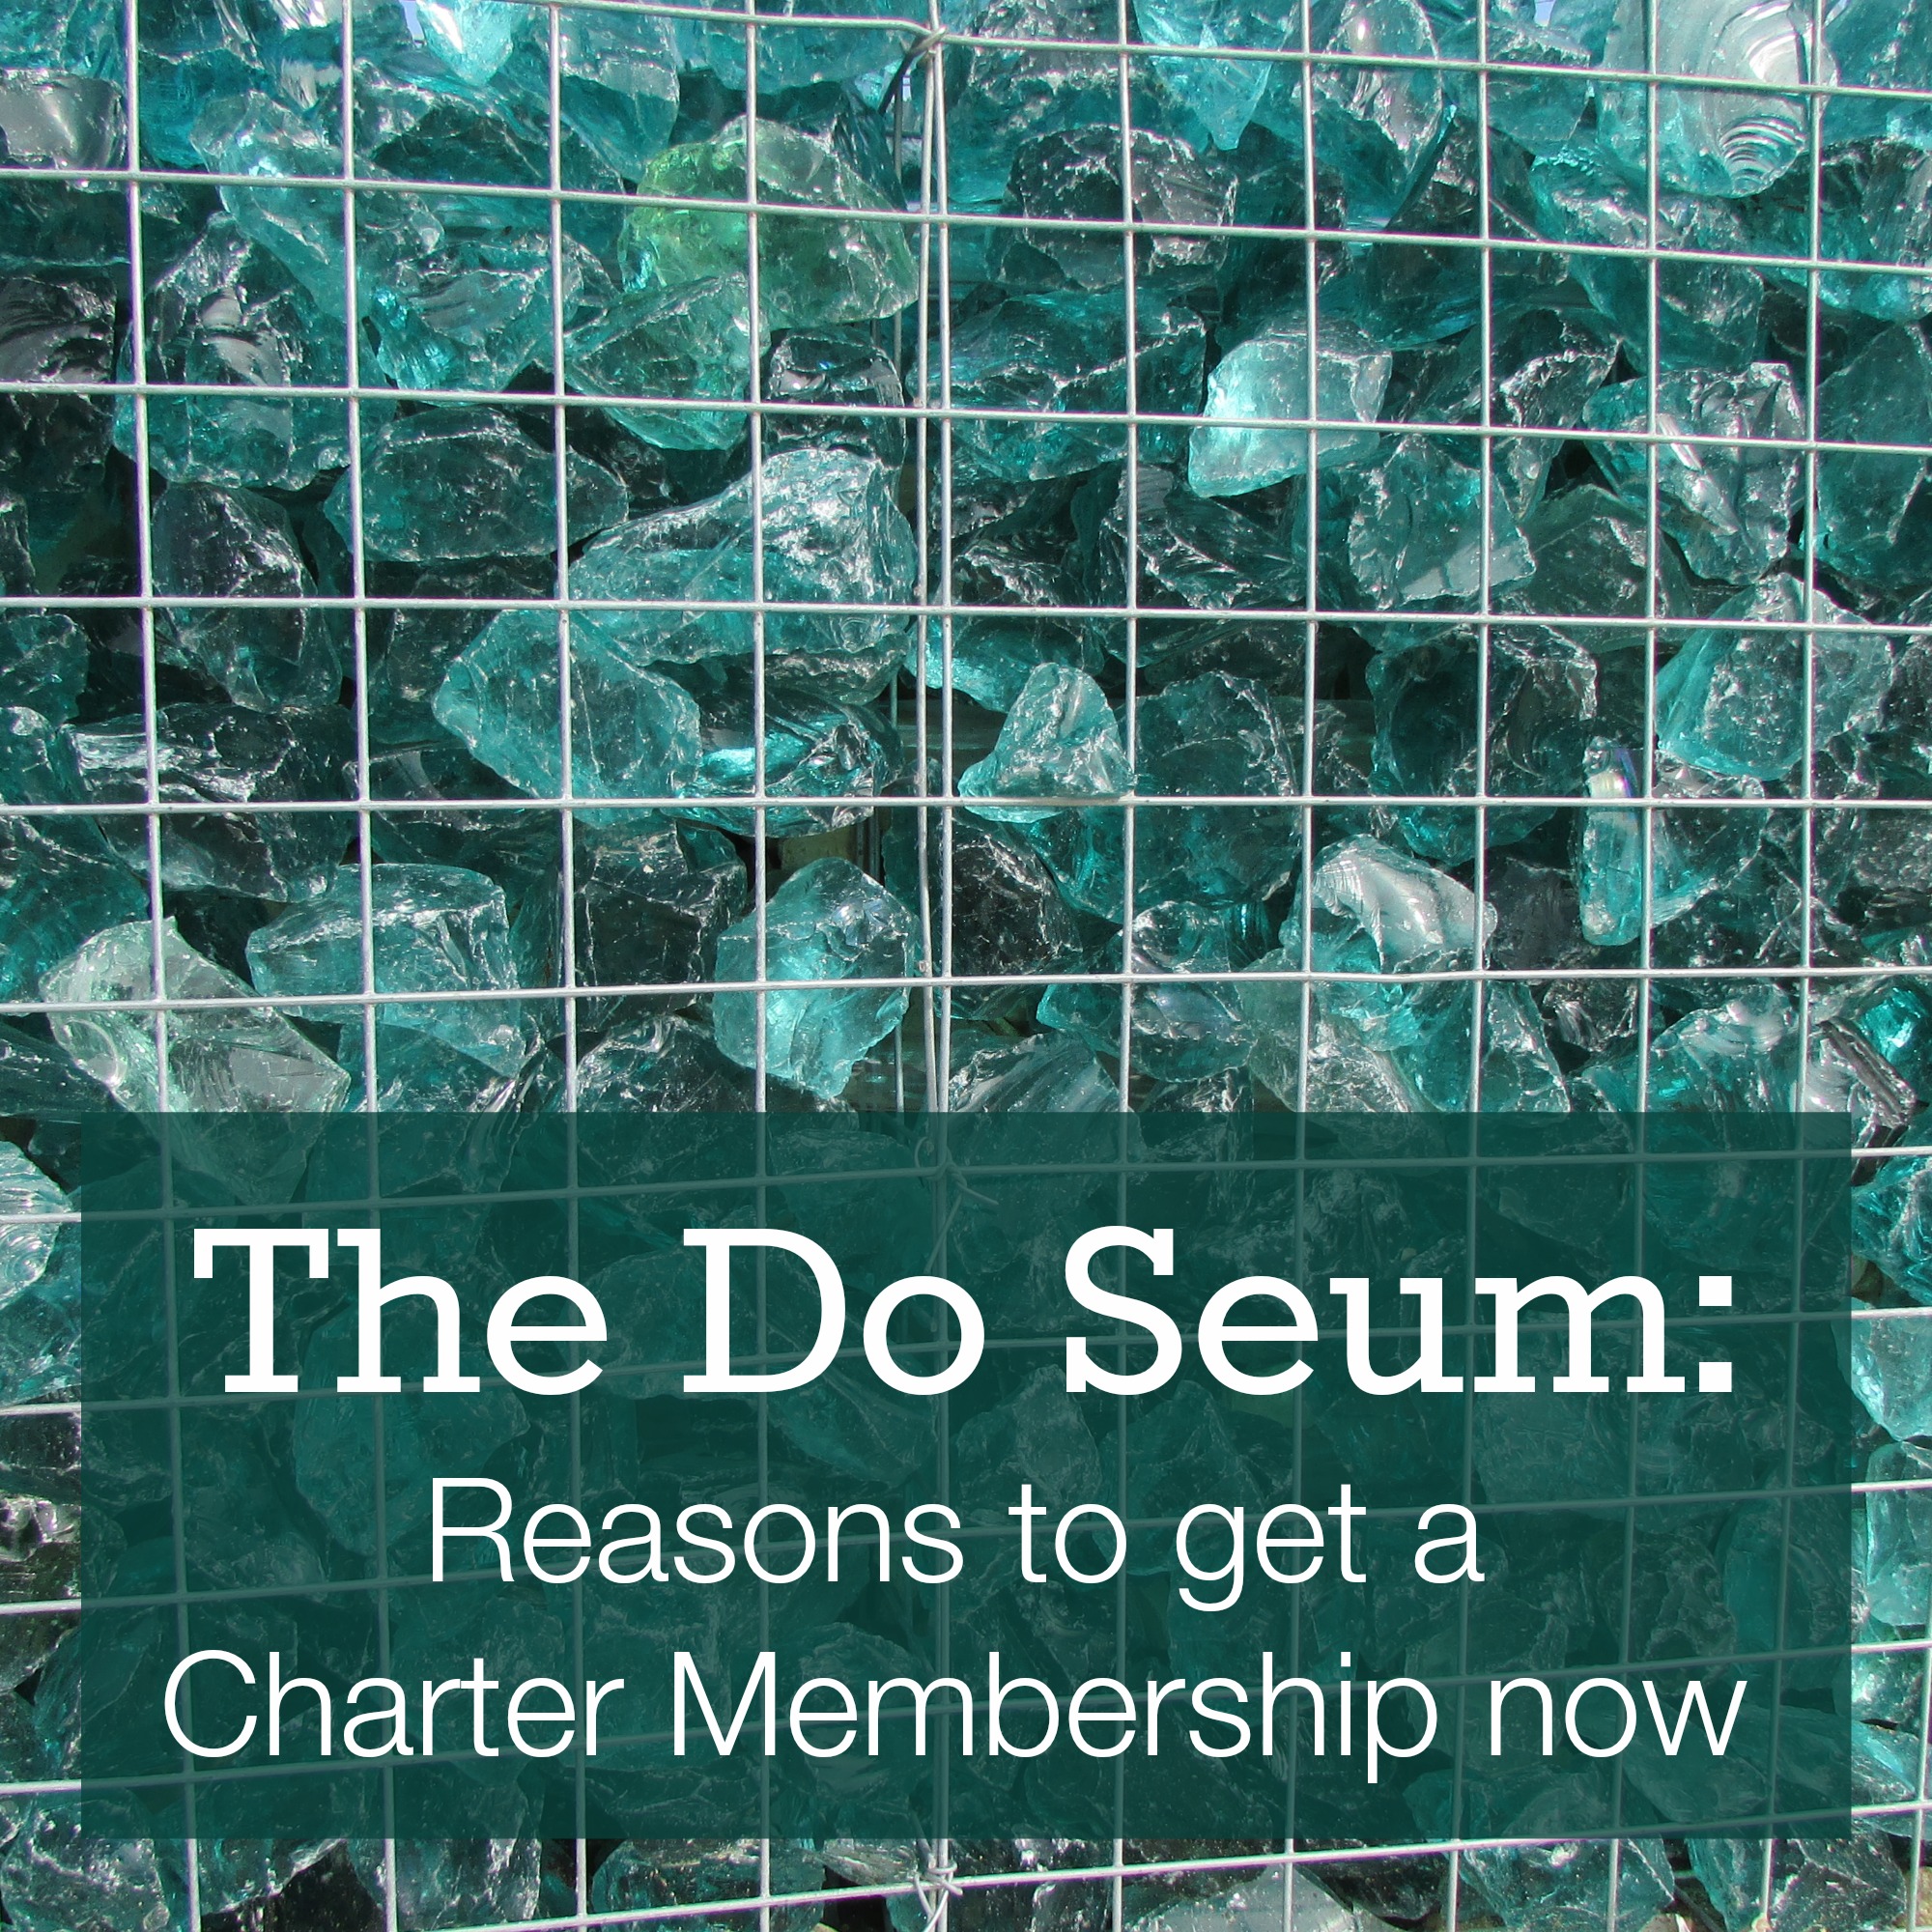 The Do Seum: Reasons to get a Charter Membership now